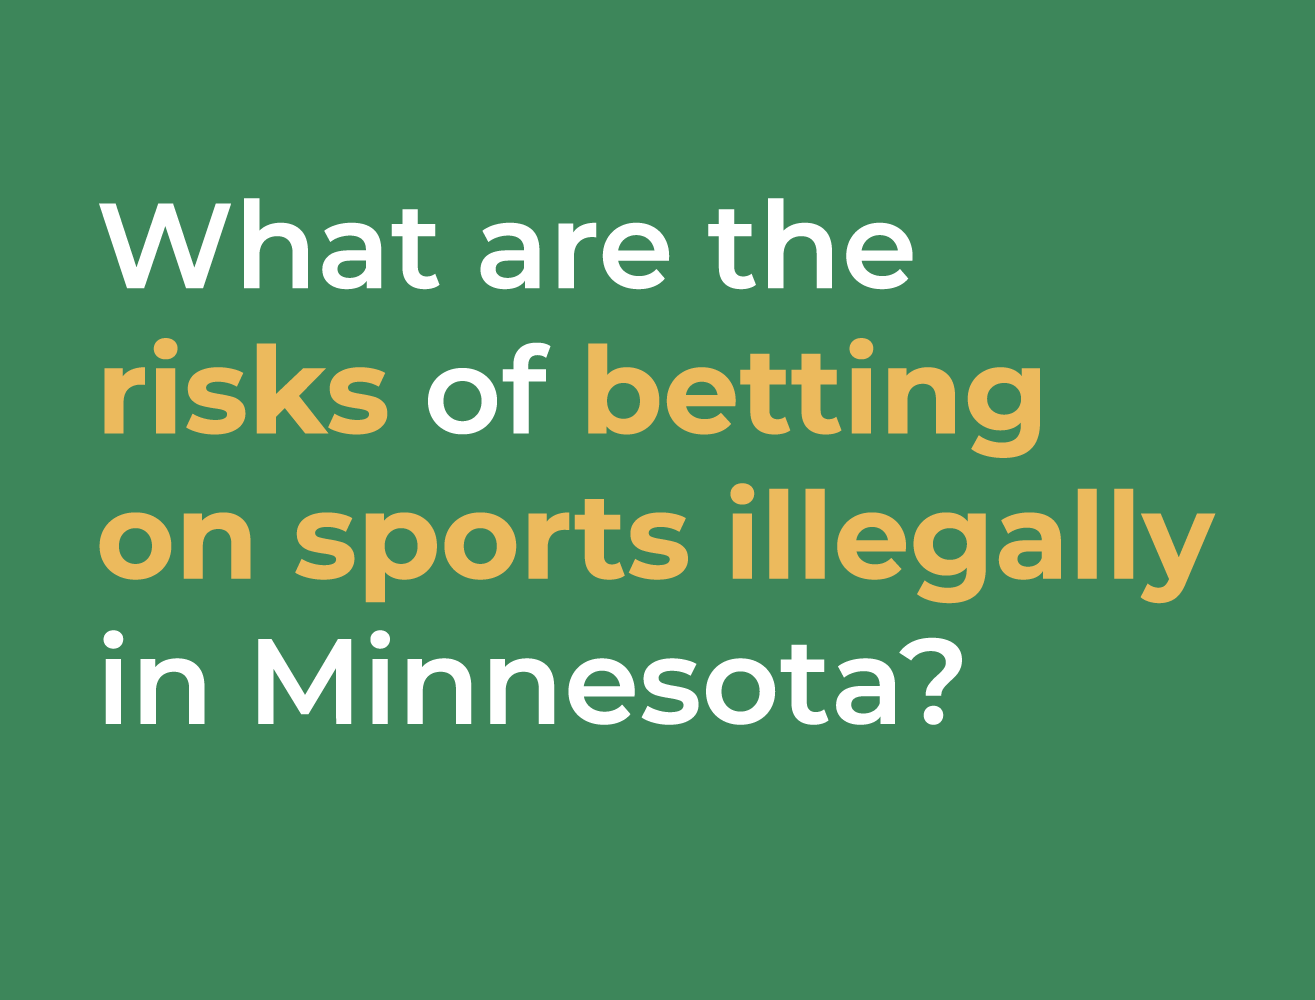 What are the risks of betting on sports illegally in Minnesota?